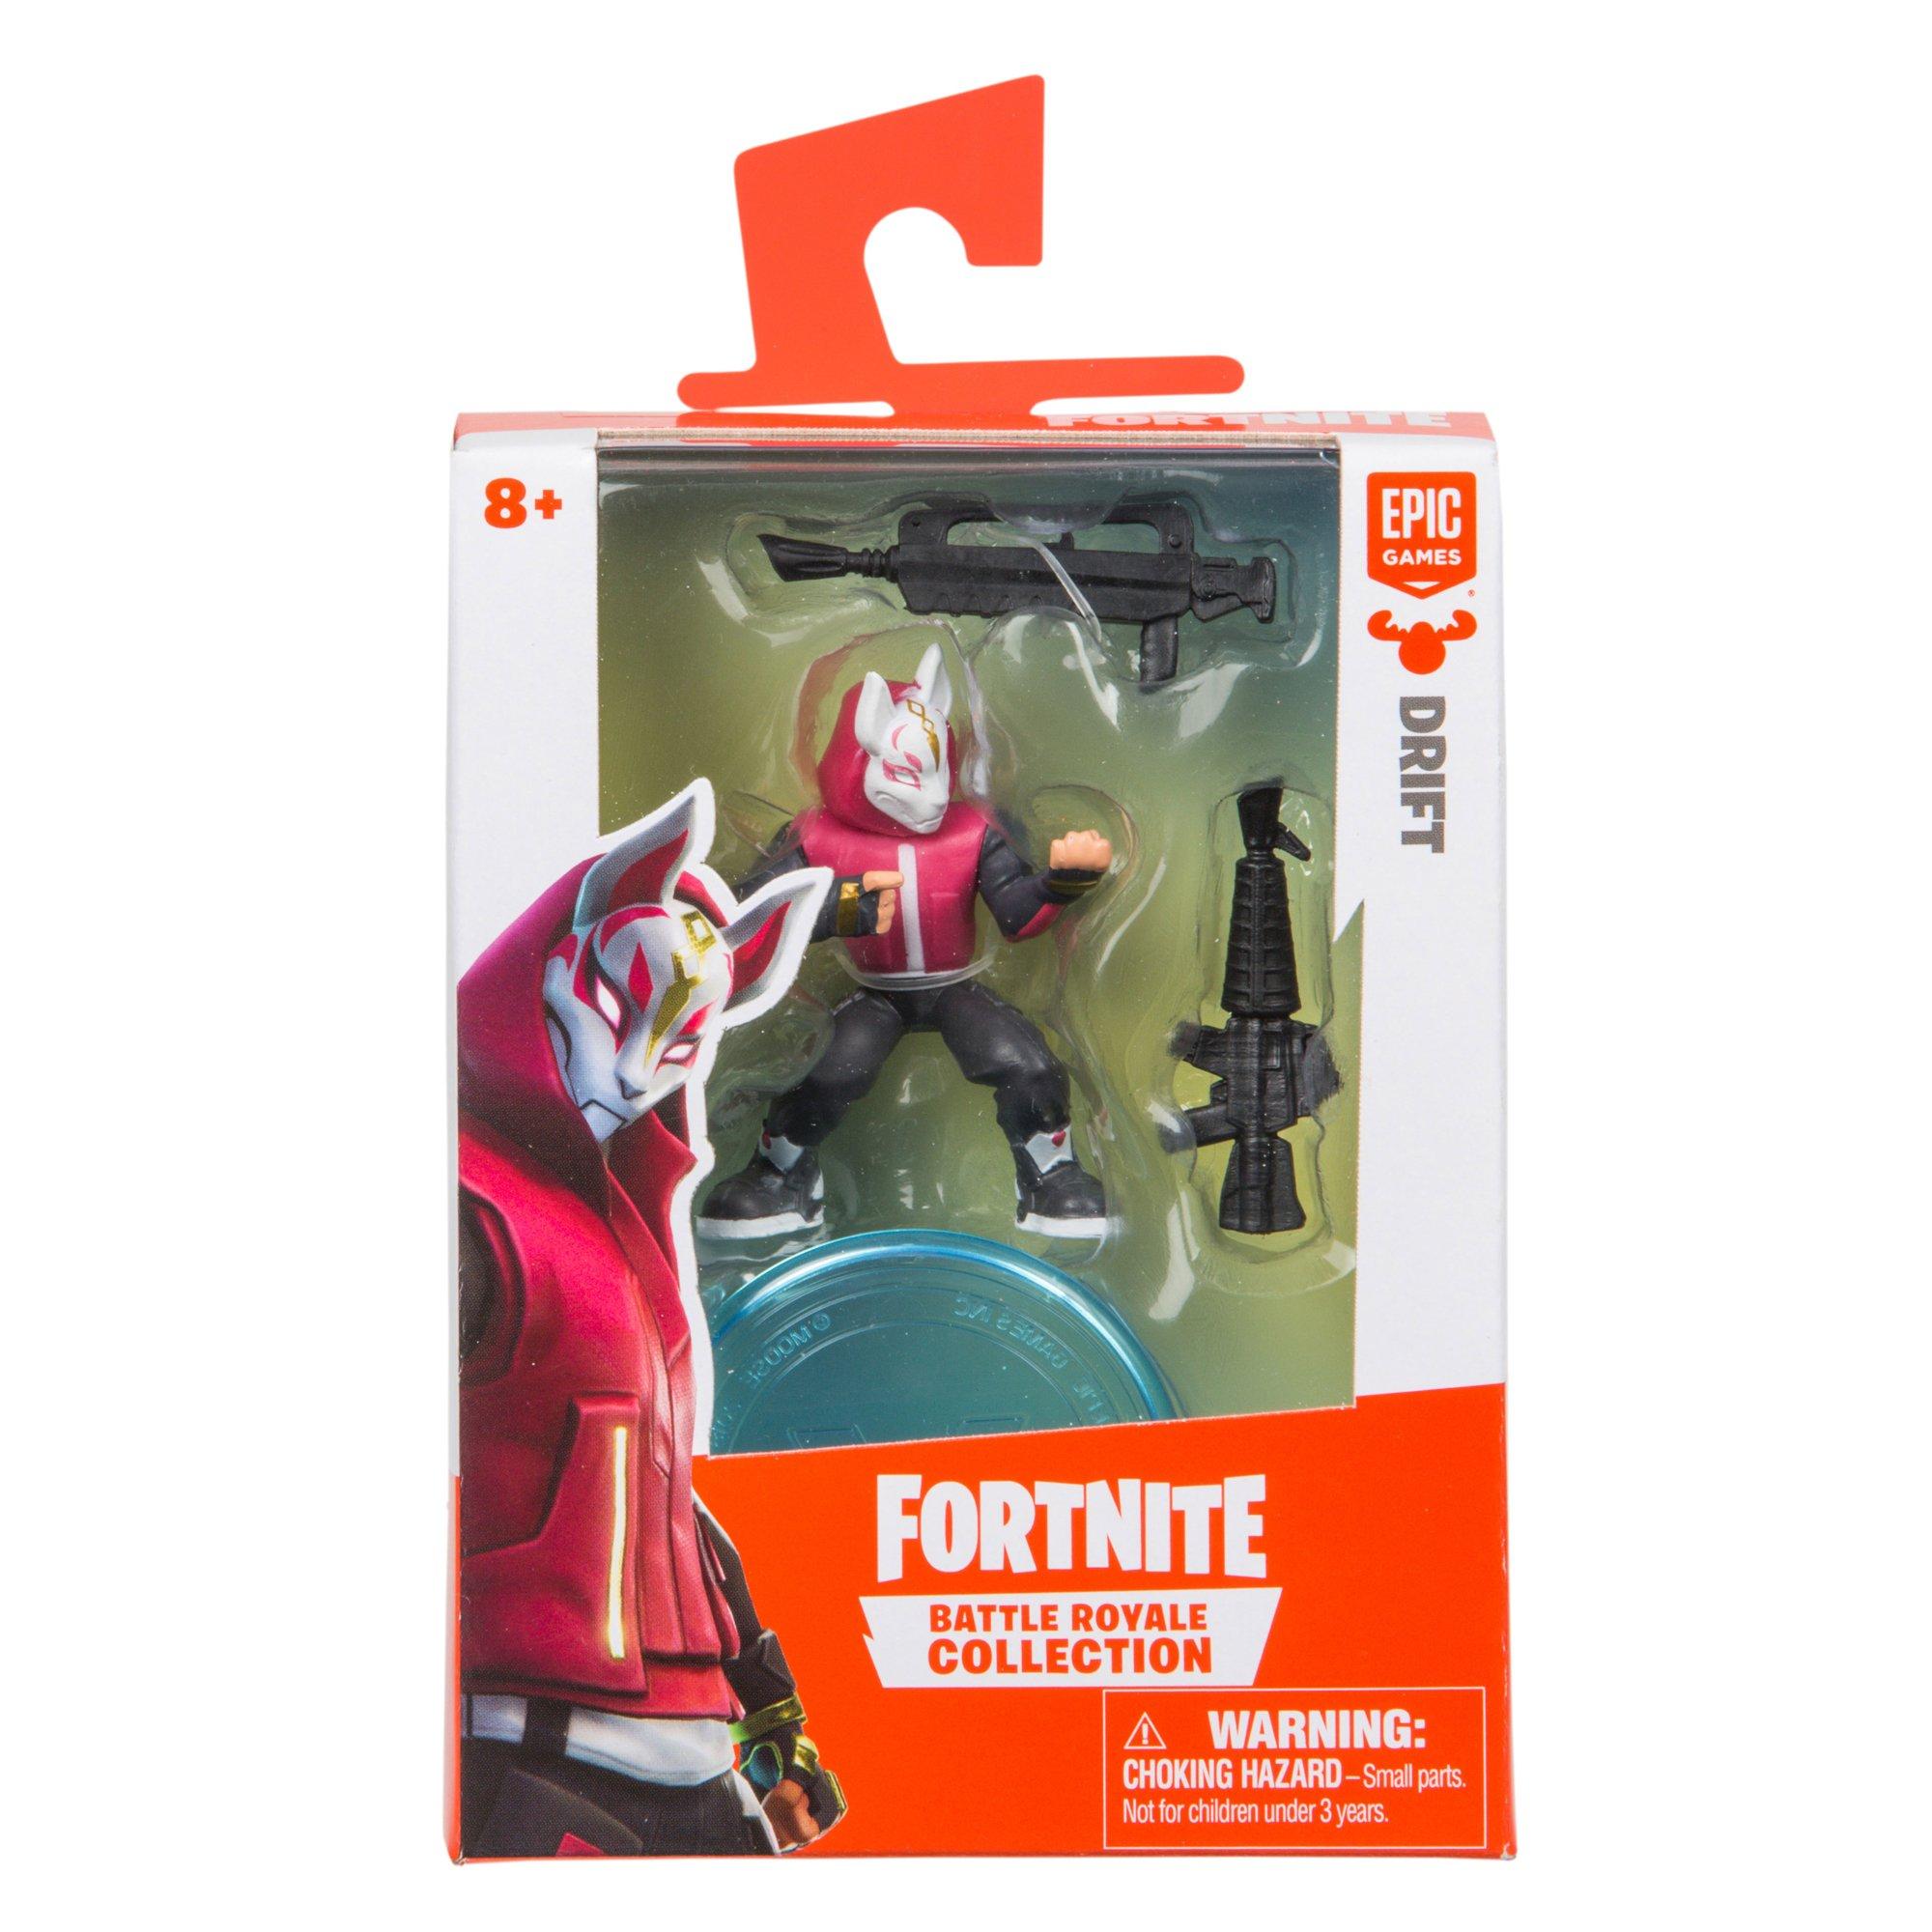 How Much Does Fortnite Toys Cost In Gamestop Fortnite Solo Figure Assortment Gamestop